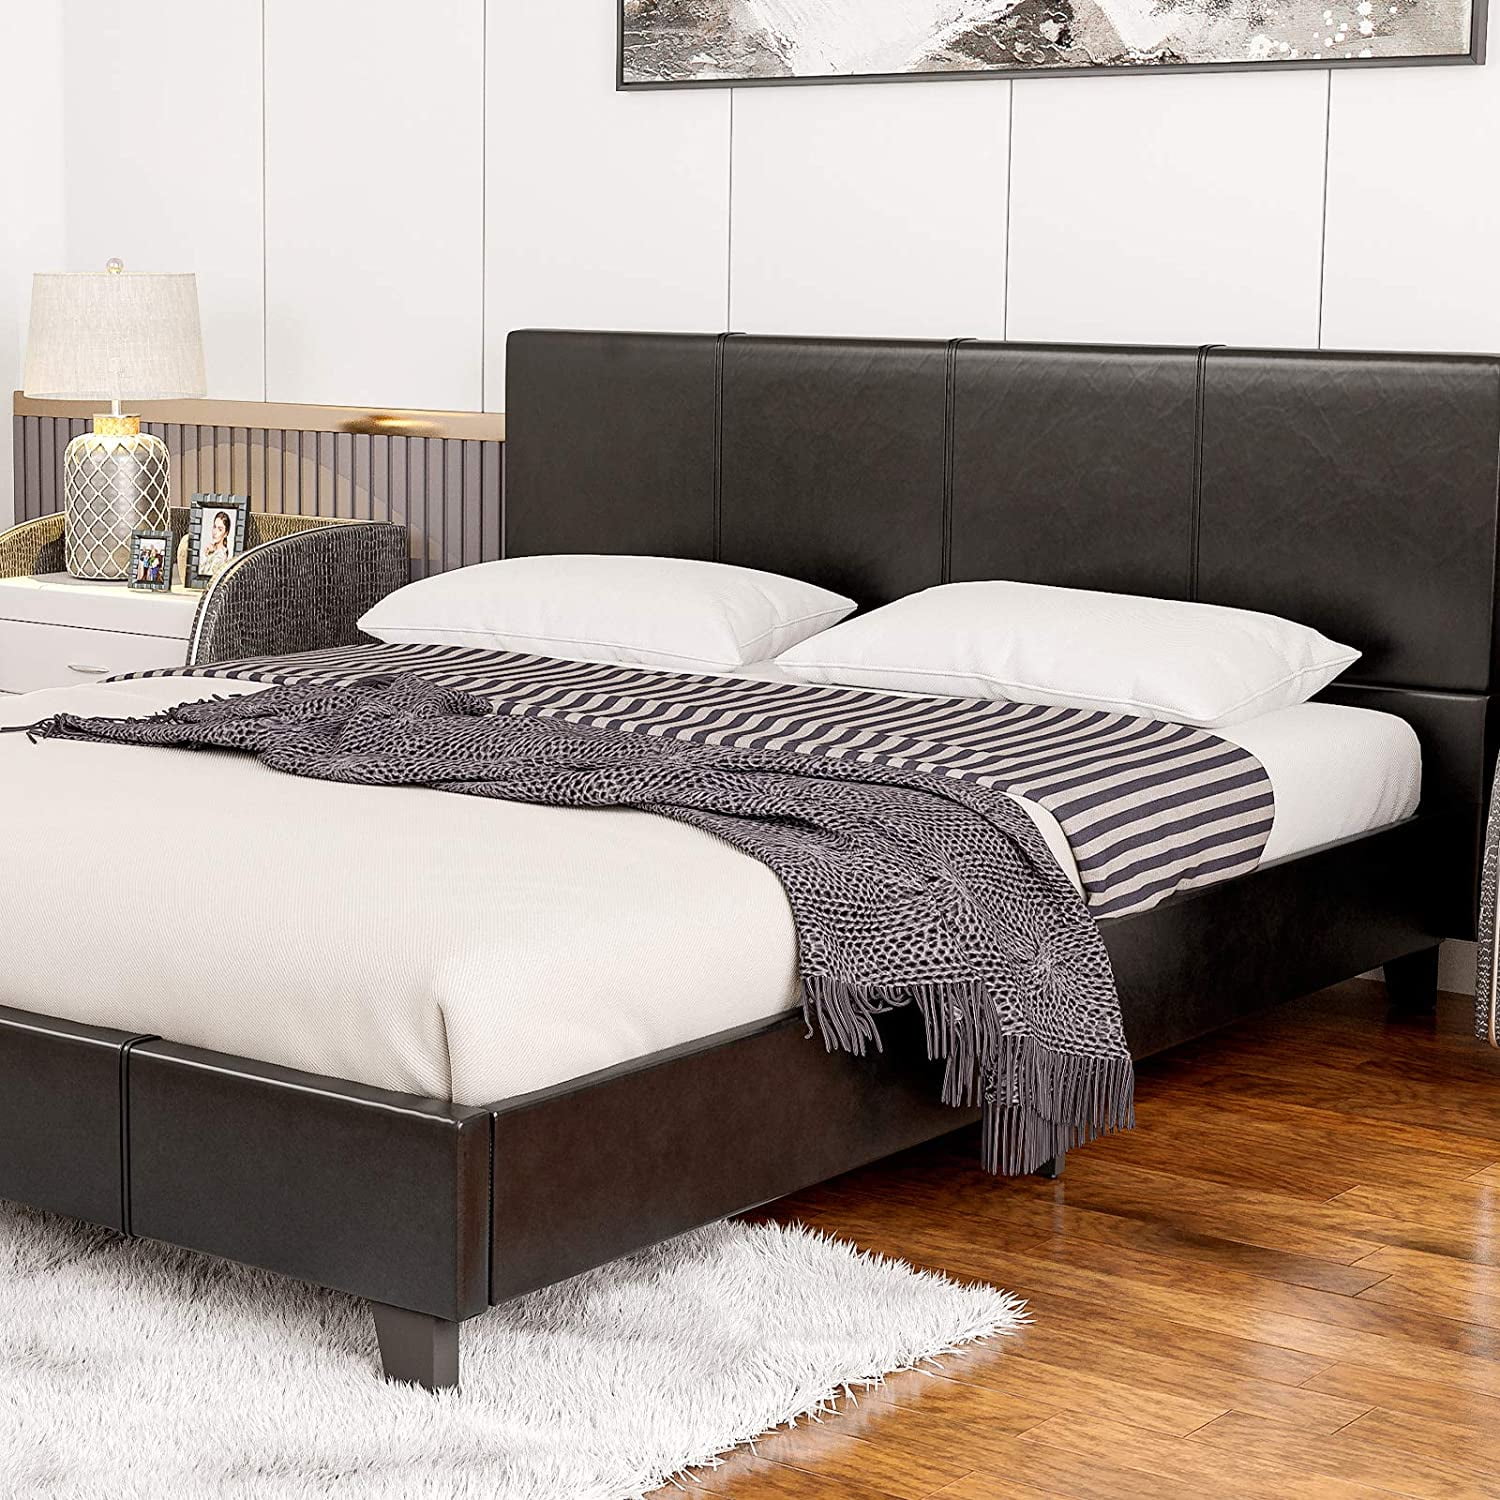 mecor Vintage Metal Twin Bed Frame No Box Spring Needed Twin, Black Easy Assembly Platform Bed with Strong Metal Slats Black Upholstered Faux Leather Headboard